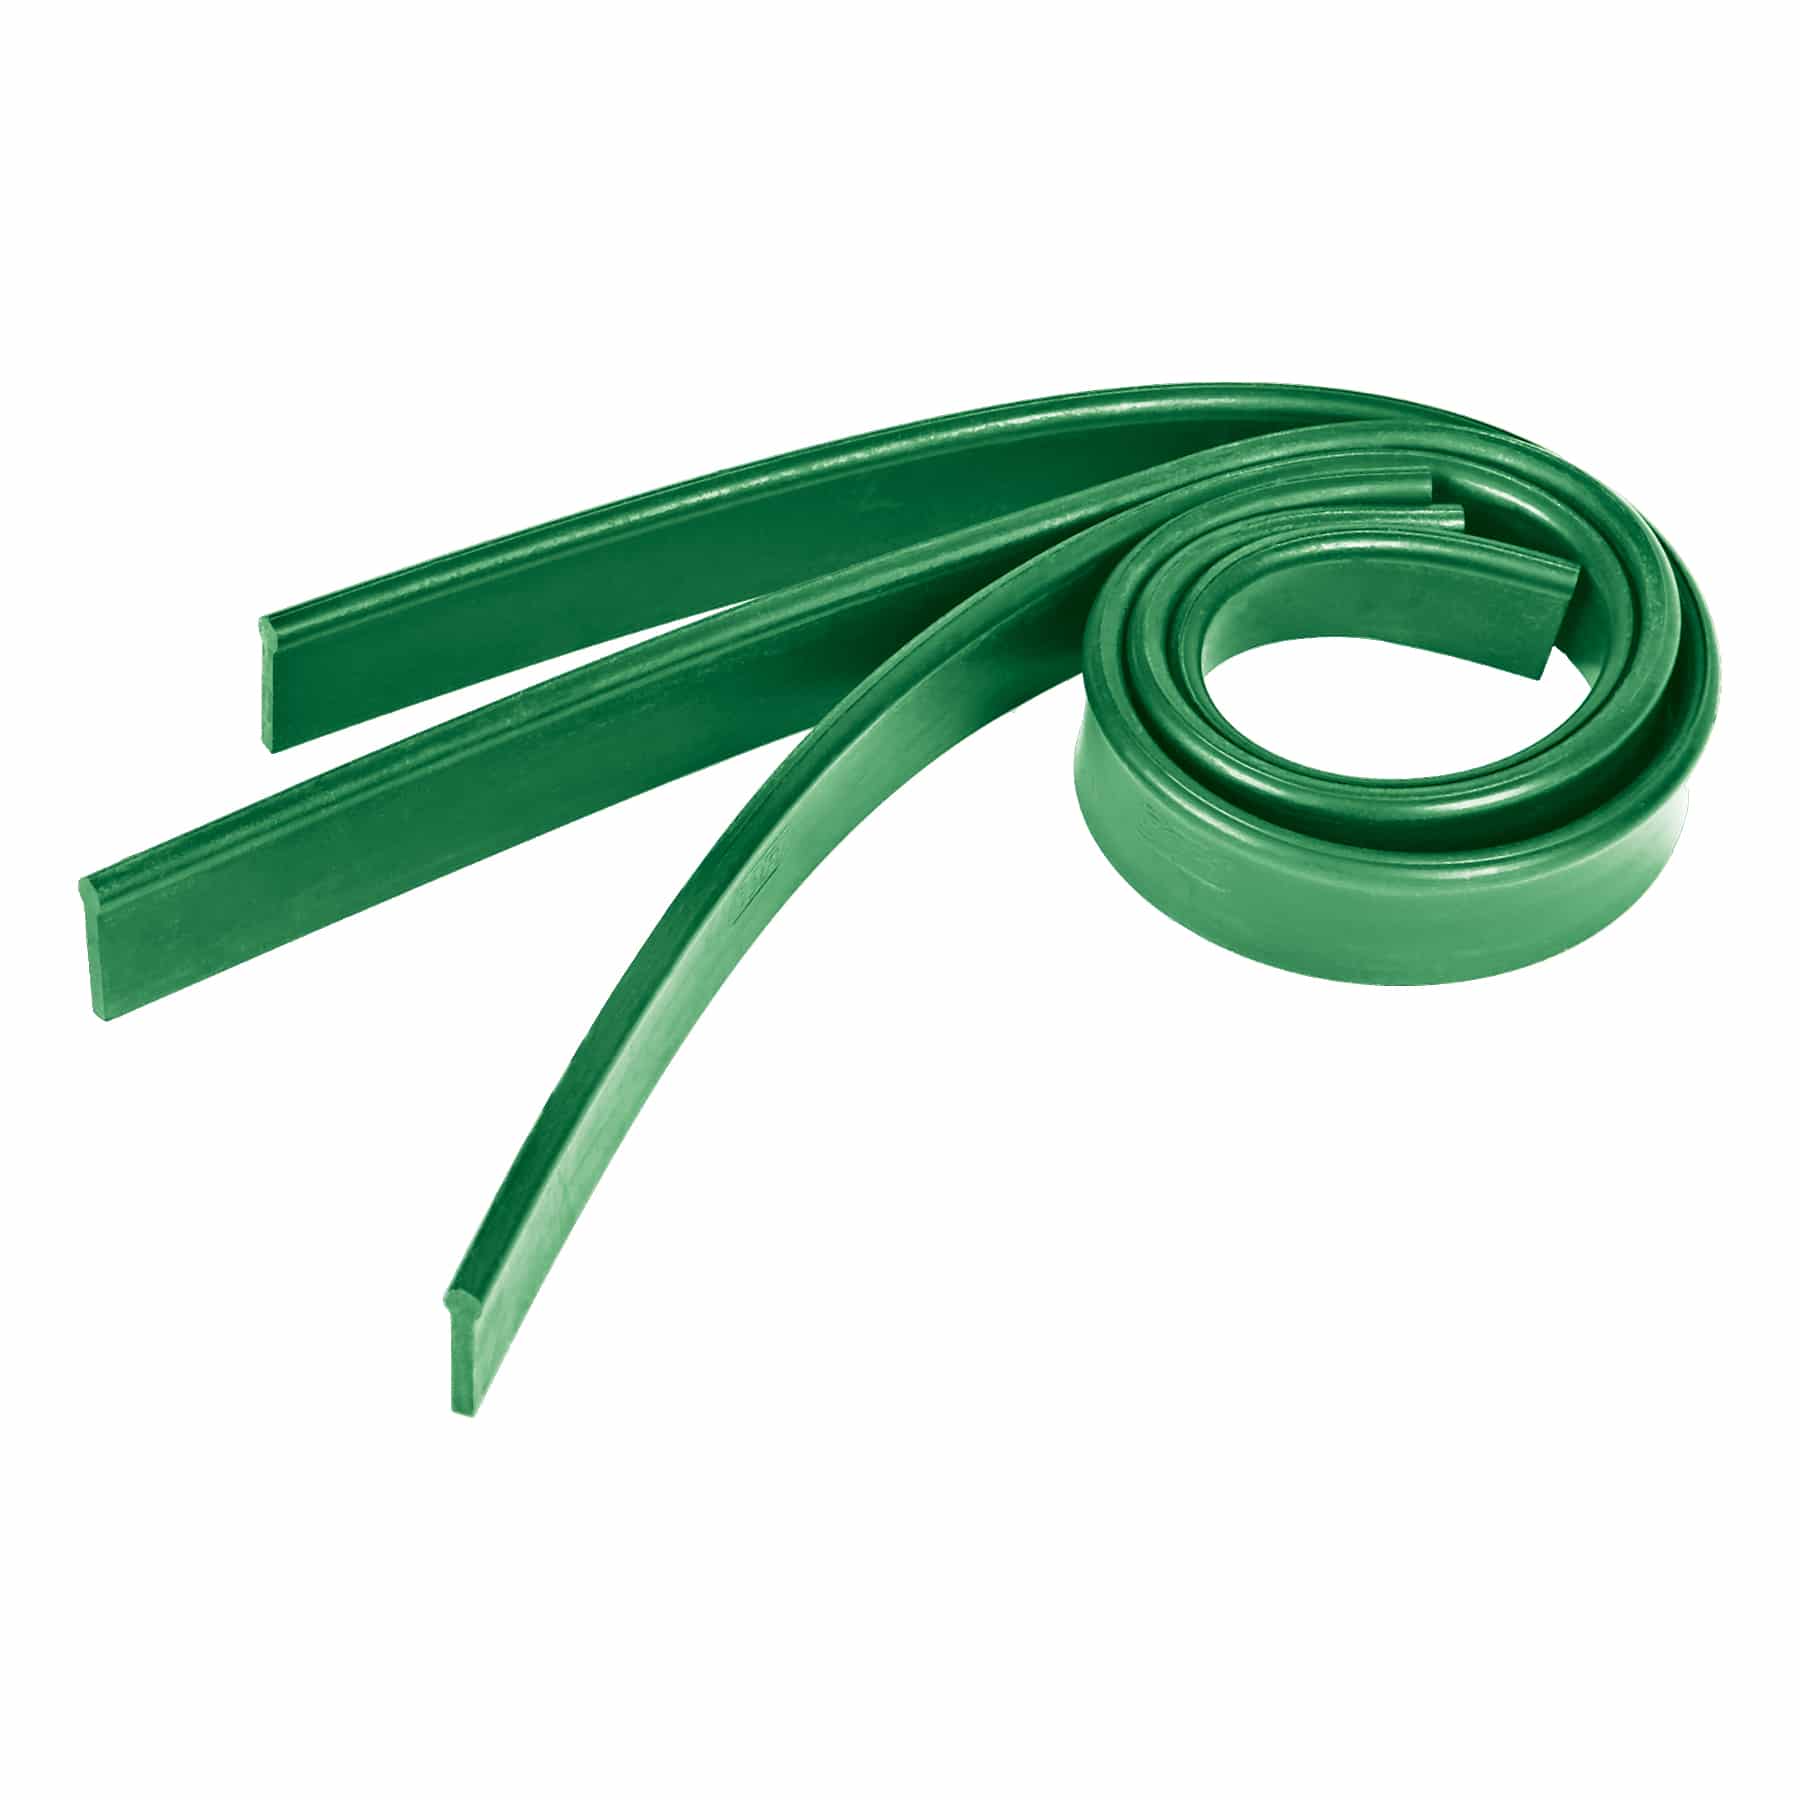 UNGER SQUEEGEE RUBBER SOFT 36" 92cm 